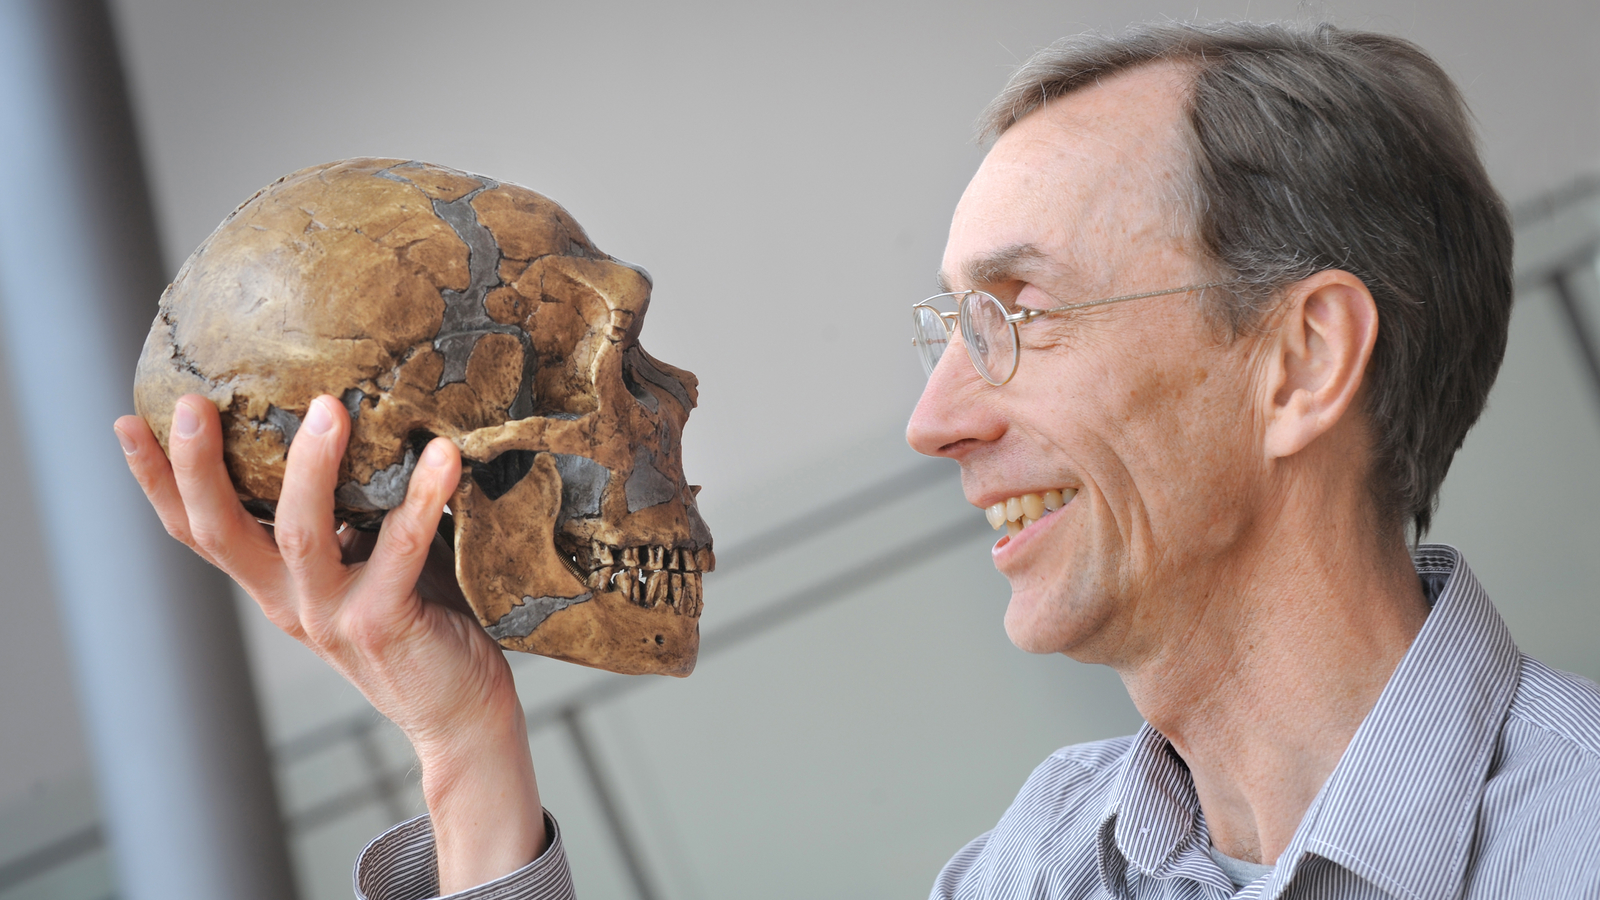 Svante Pääbo with a reconstructed Neanderthal skull